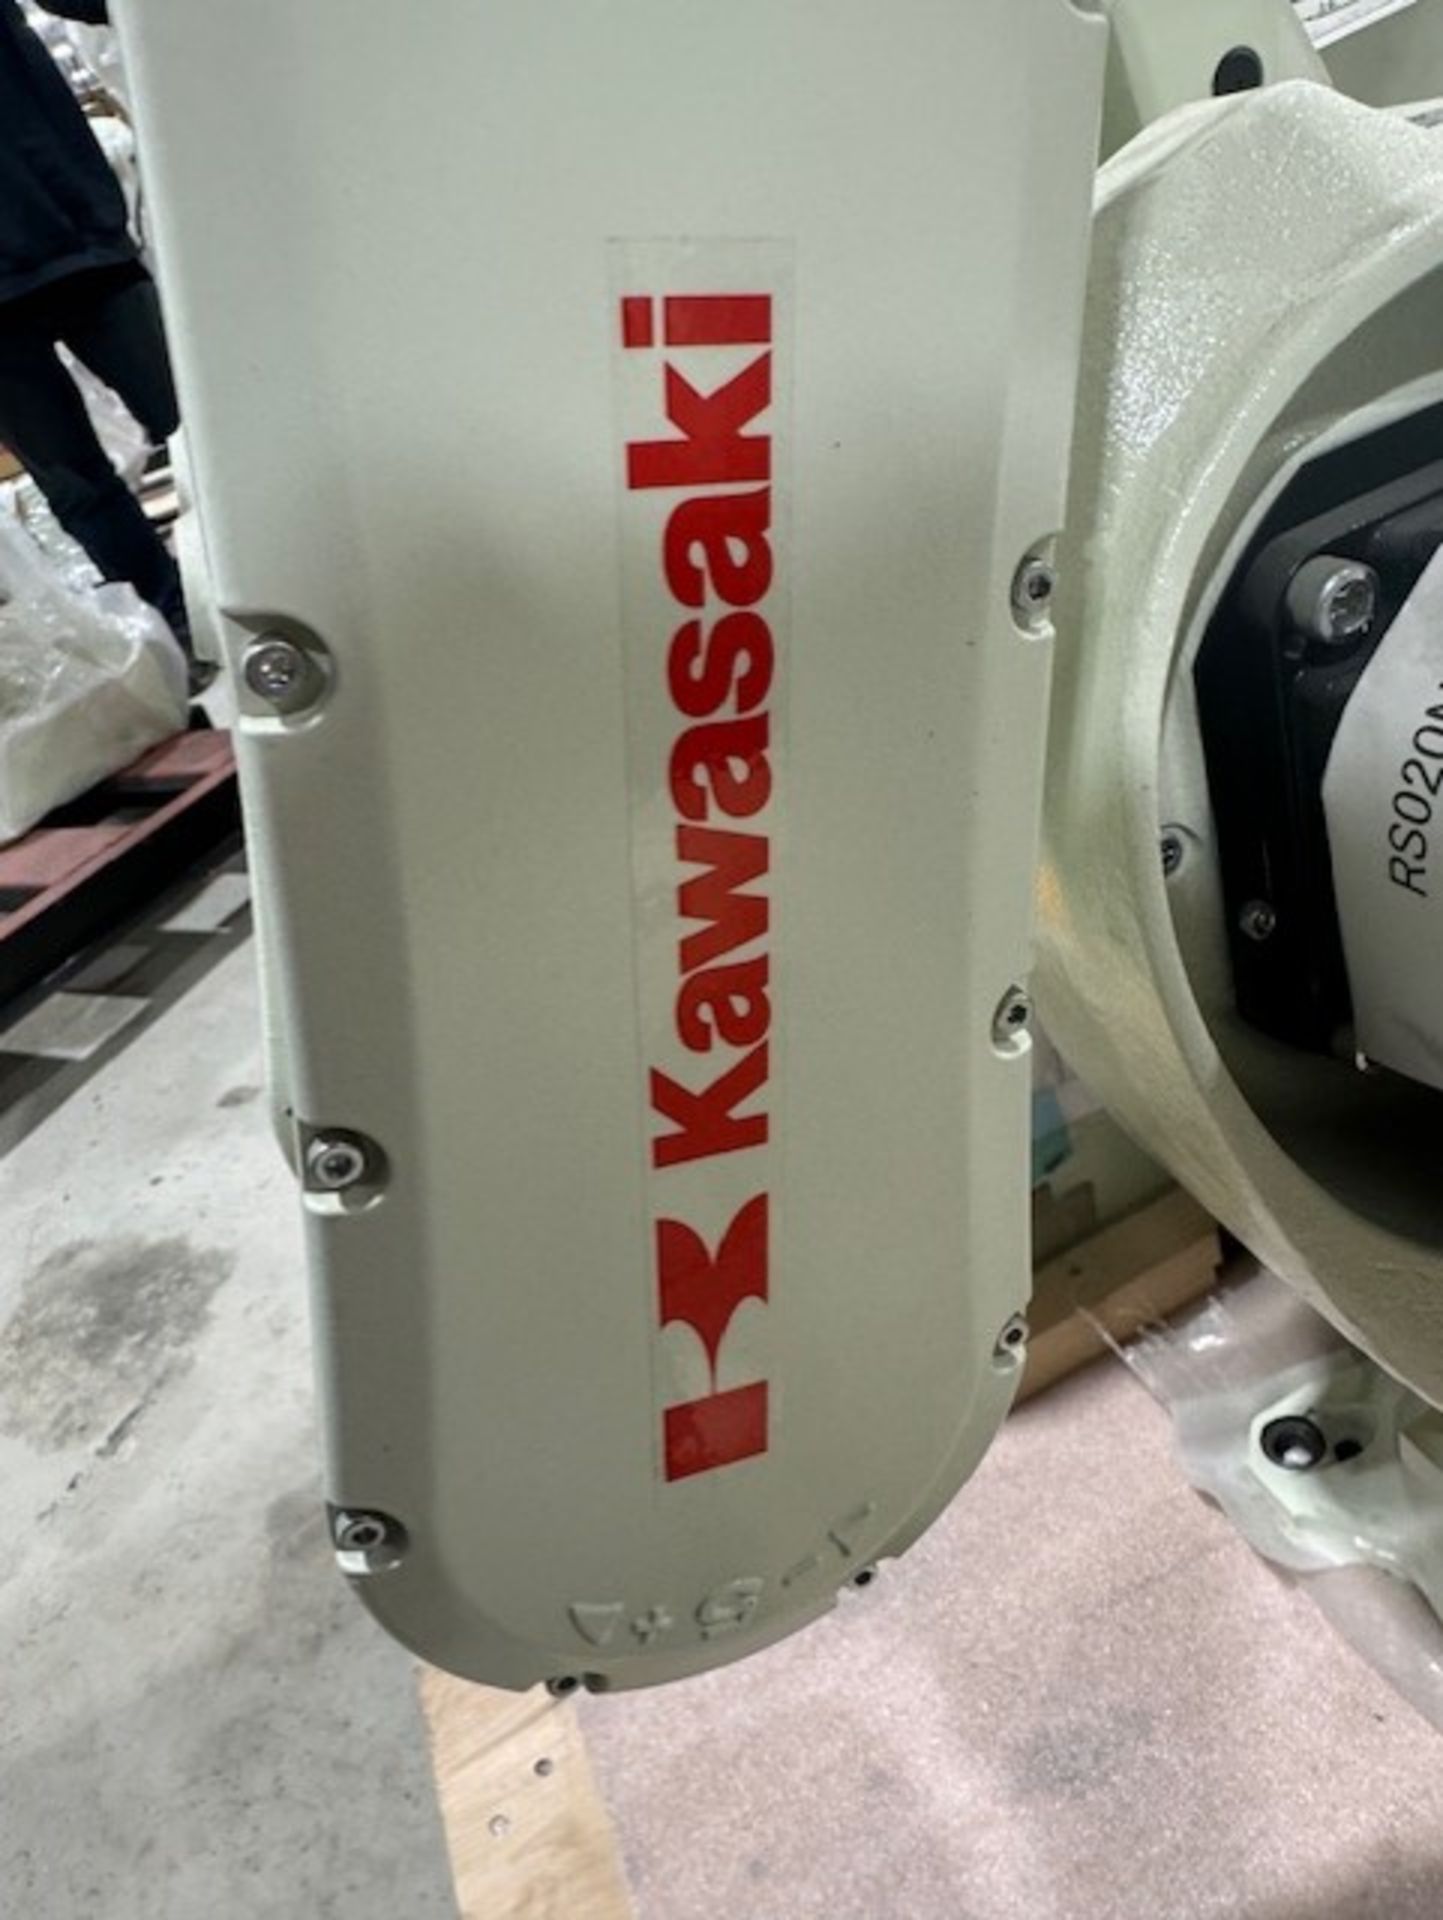 NEW KAWASAKI ROBOT MODEL RS020N, SN 4698, 20KG X 1725MM REACH WITH EO1 CONTROLS, CABLES & TEACH - Image 5 of 7